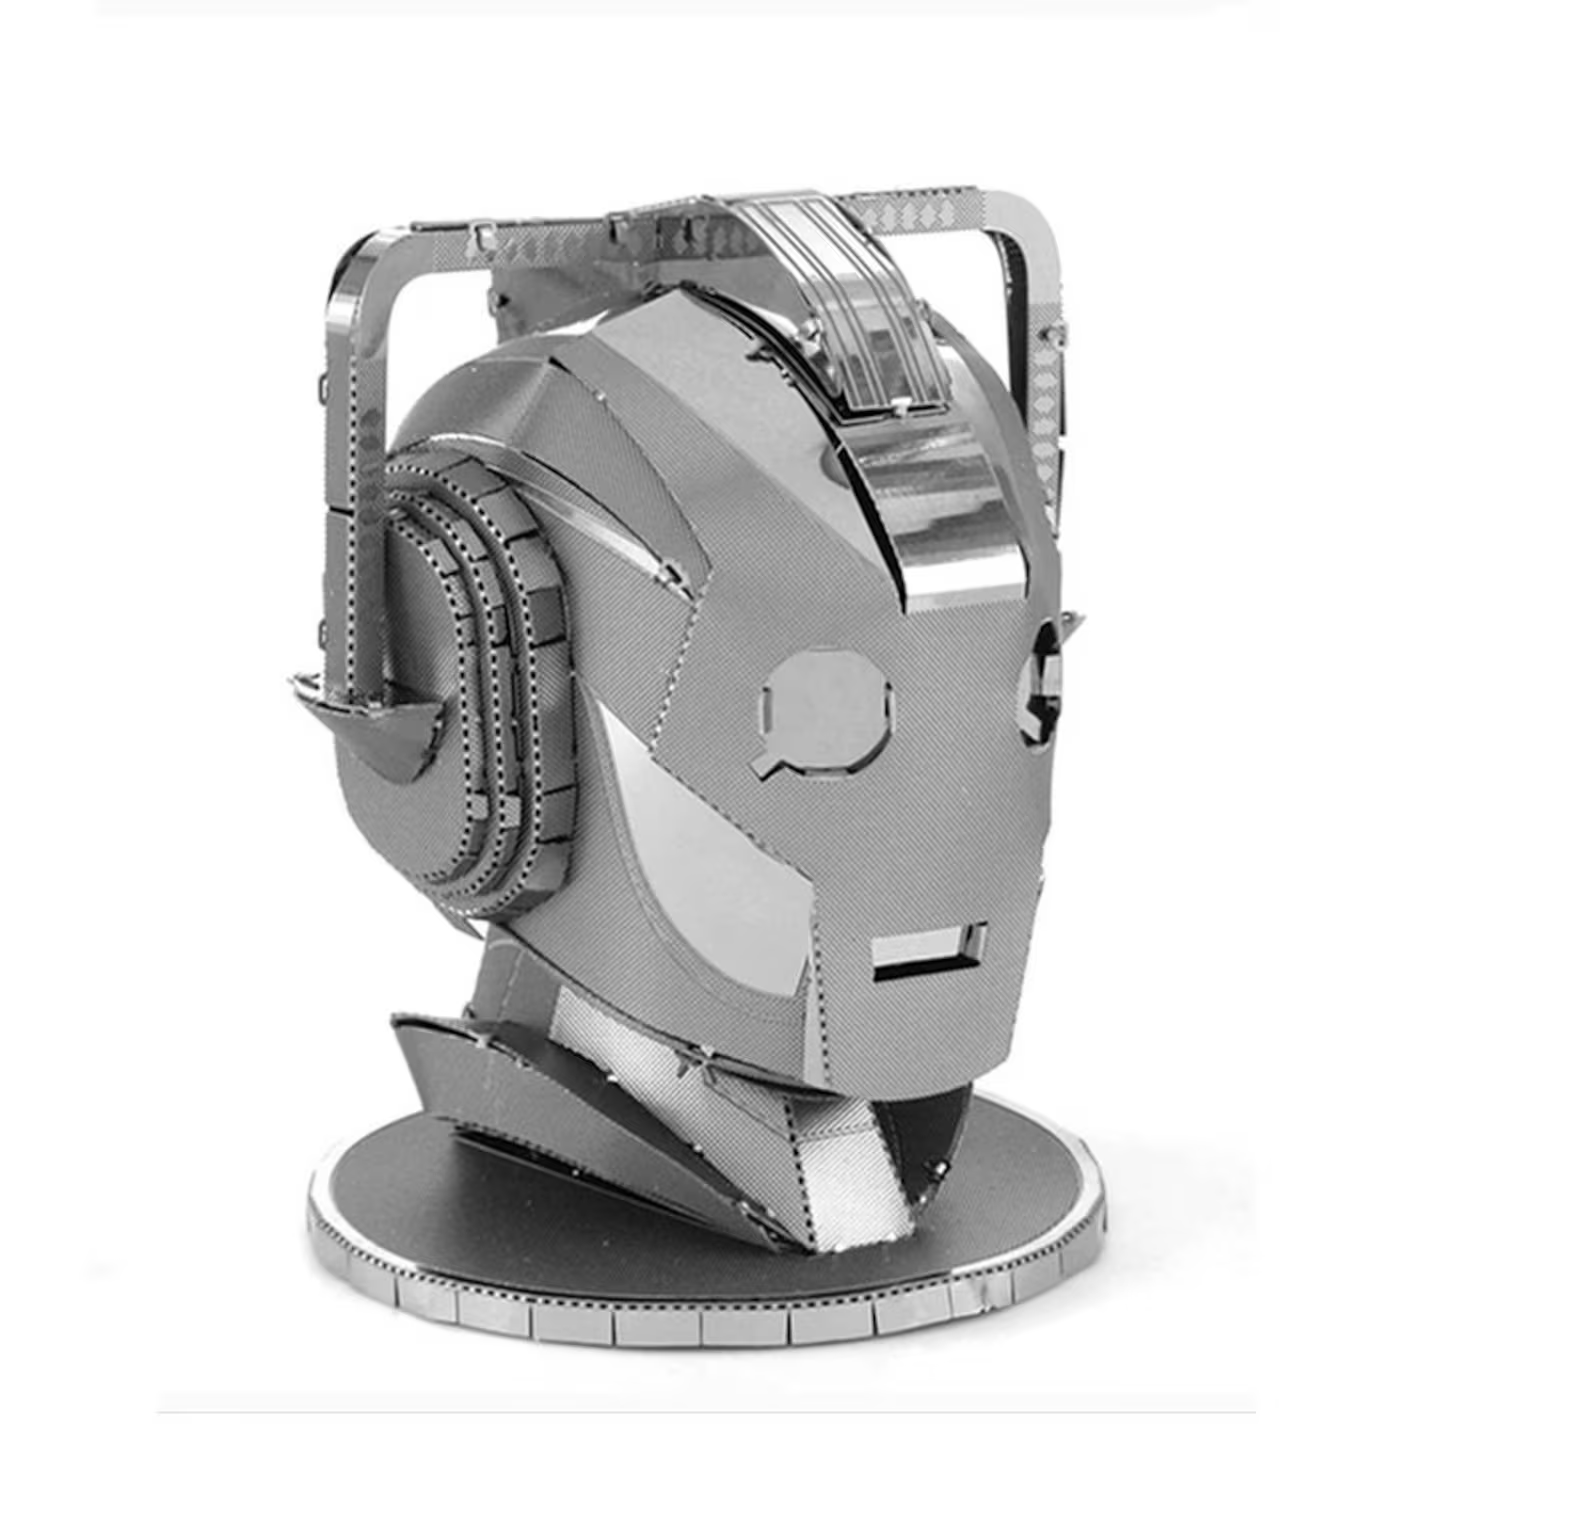 A craft model of a Cyberman head from Doctor Who